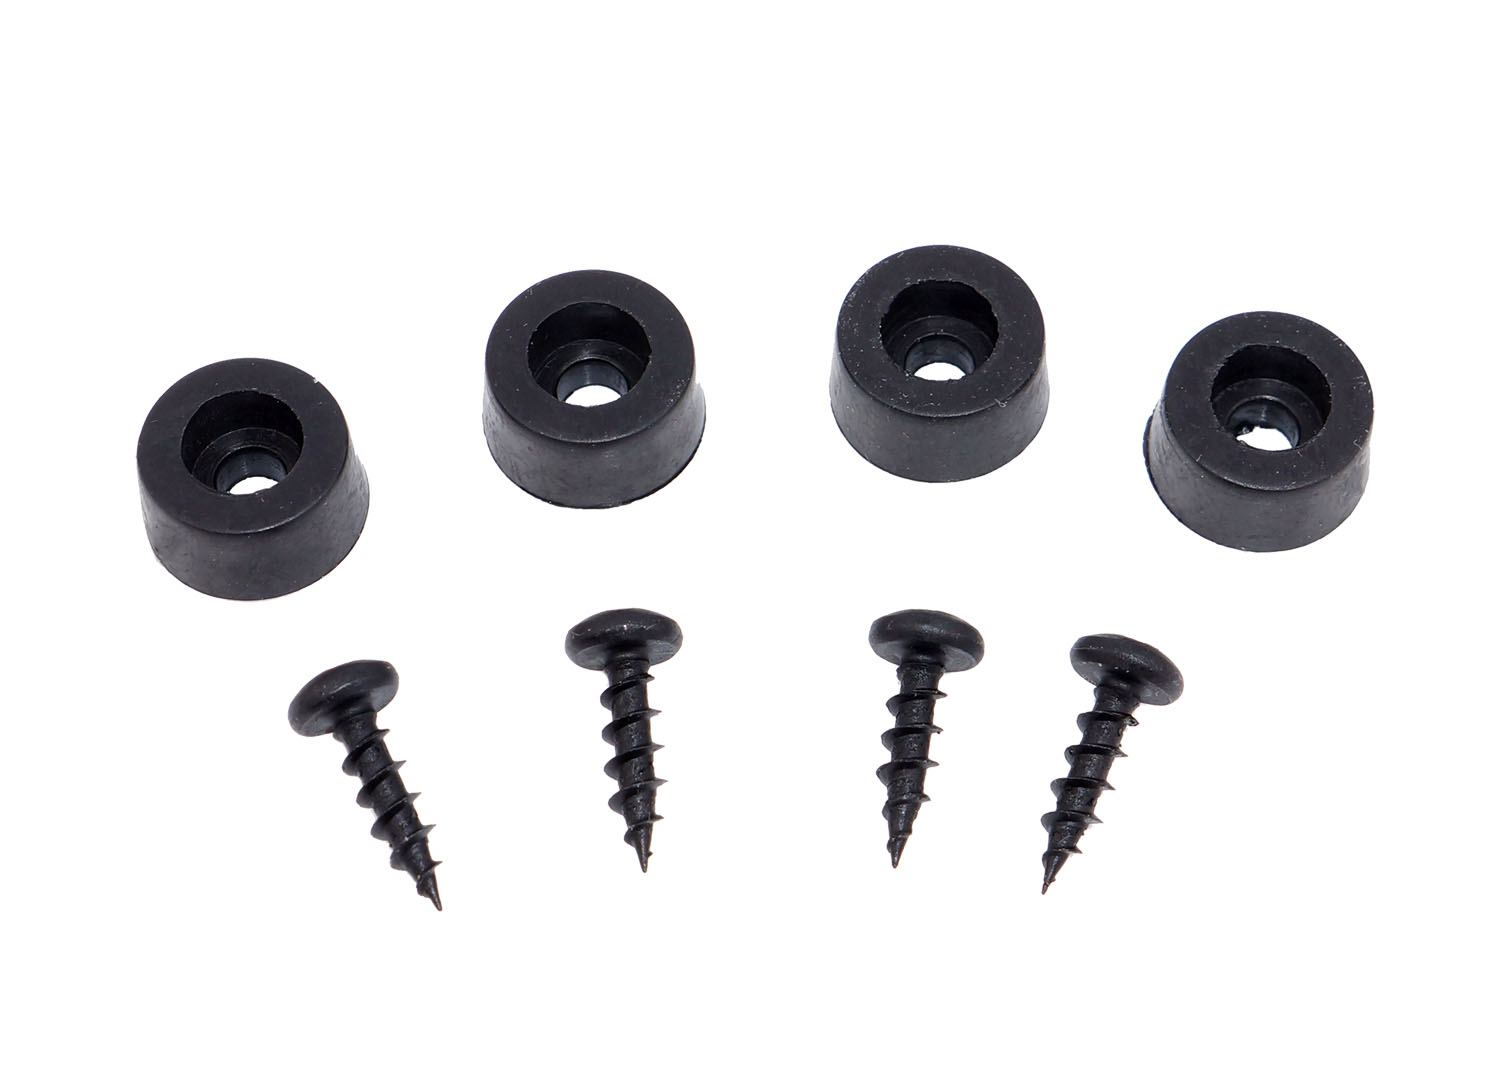 Bartop Cabinet Feet With Screws 4 Pack